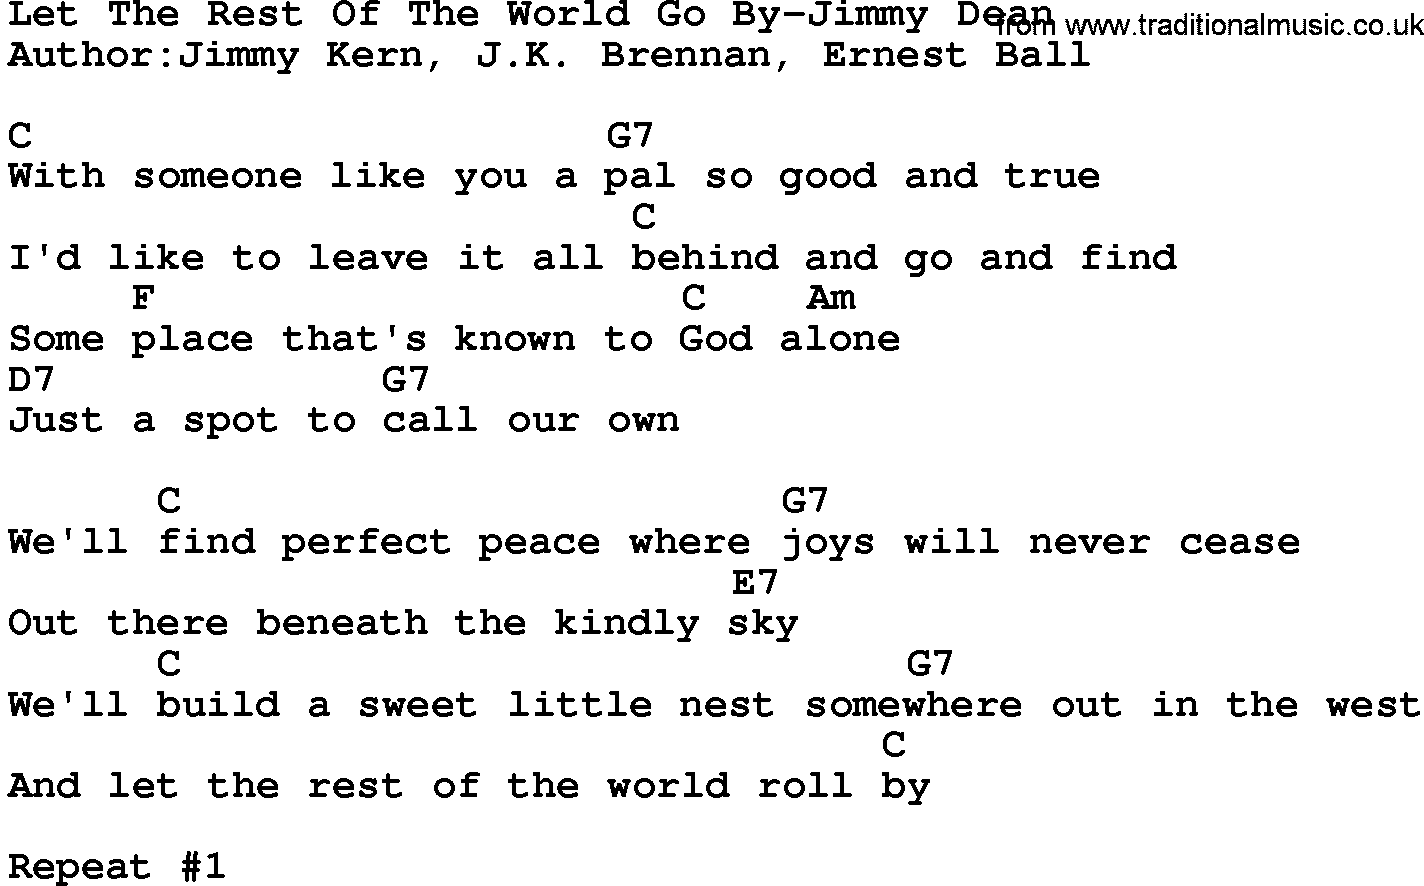 Country music song: Let The Rest Of The World Go By-Jimmy Dean lyrics and chords